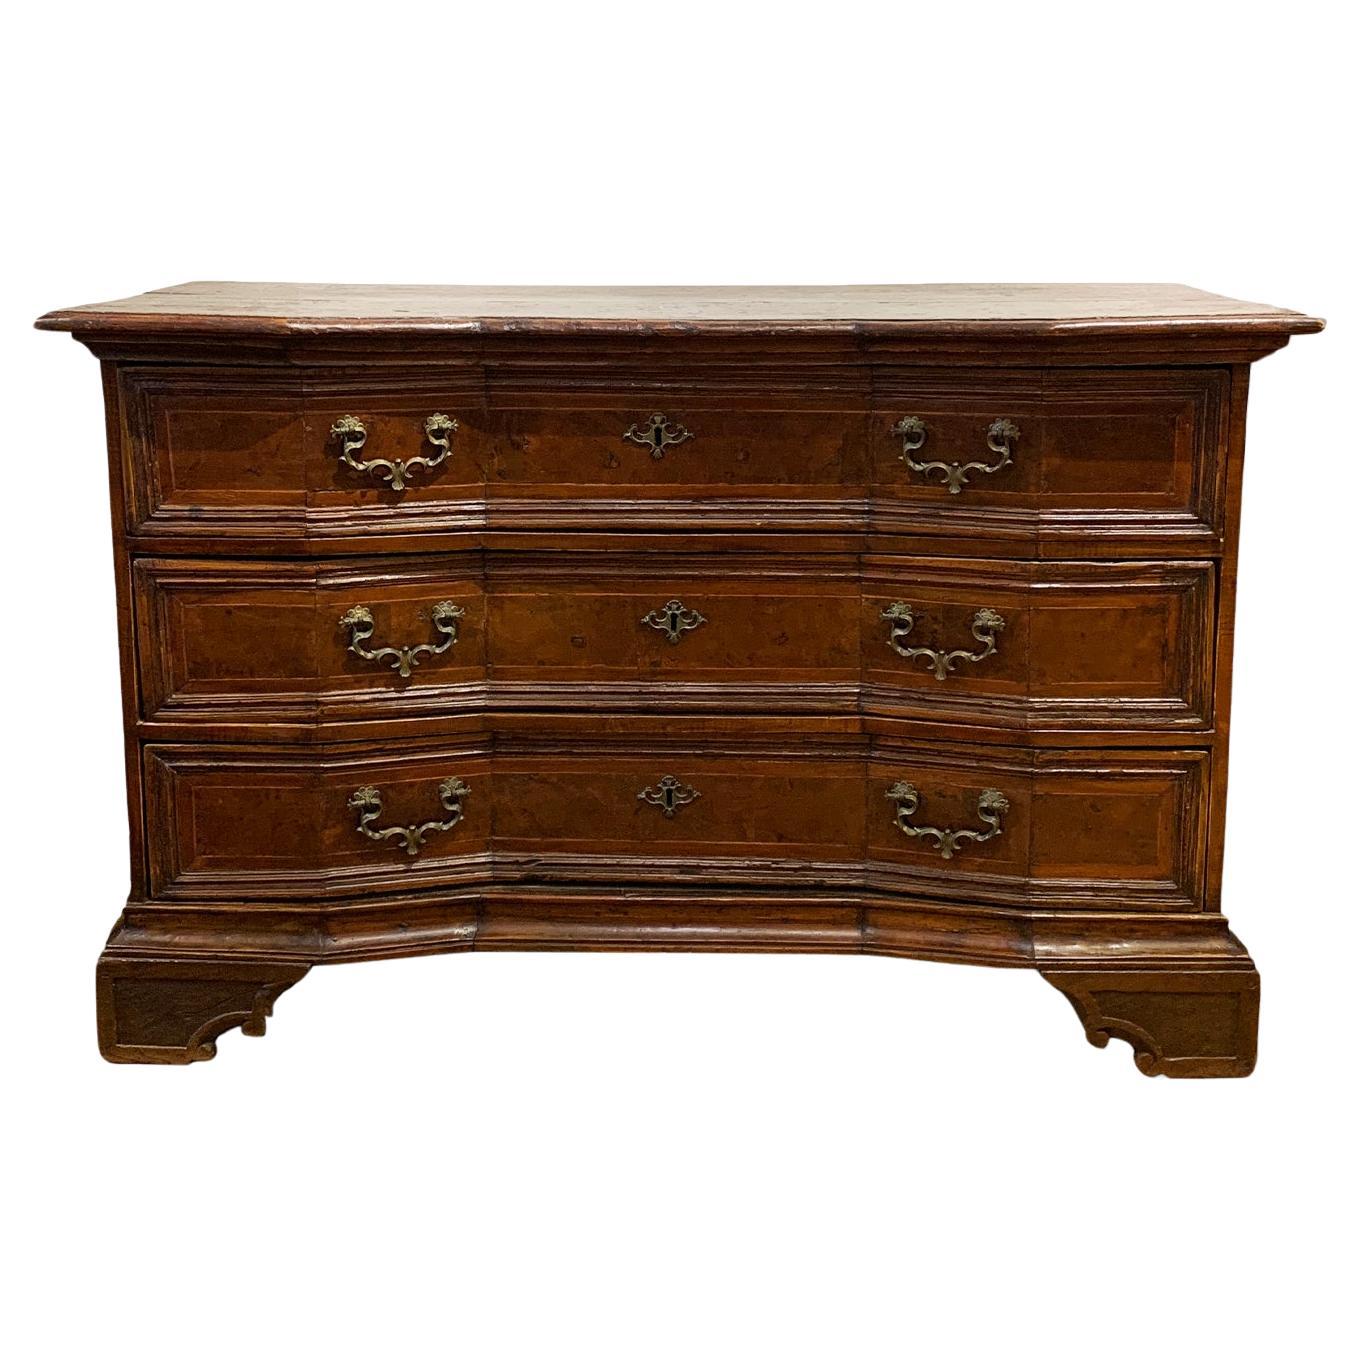 END OF 17th-EARLY 18th CENTURY "CANTERANO" BUREAU For Sale